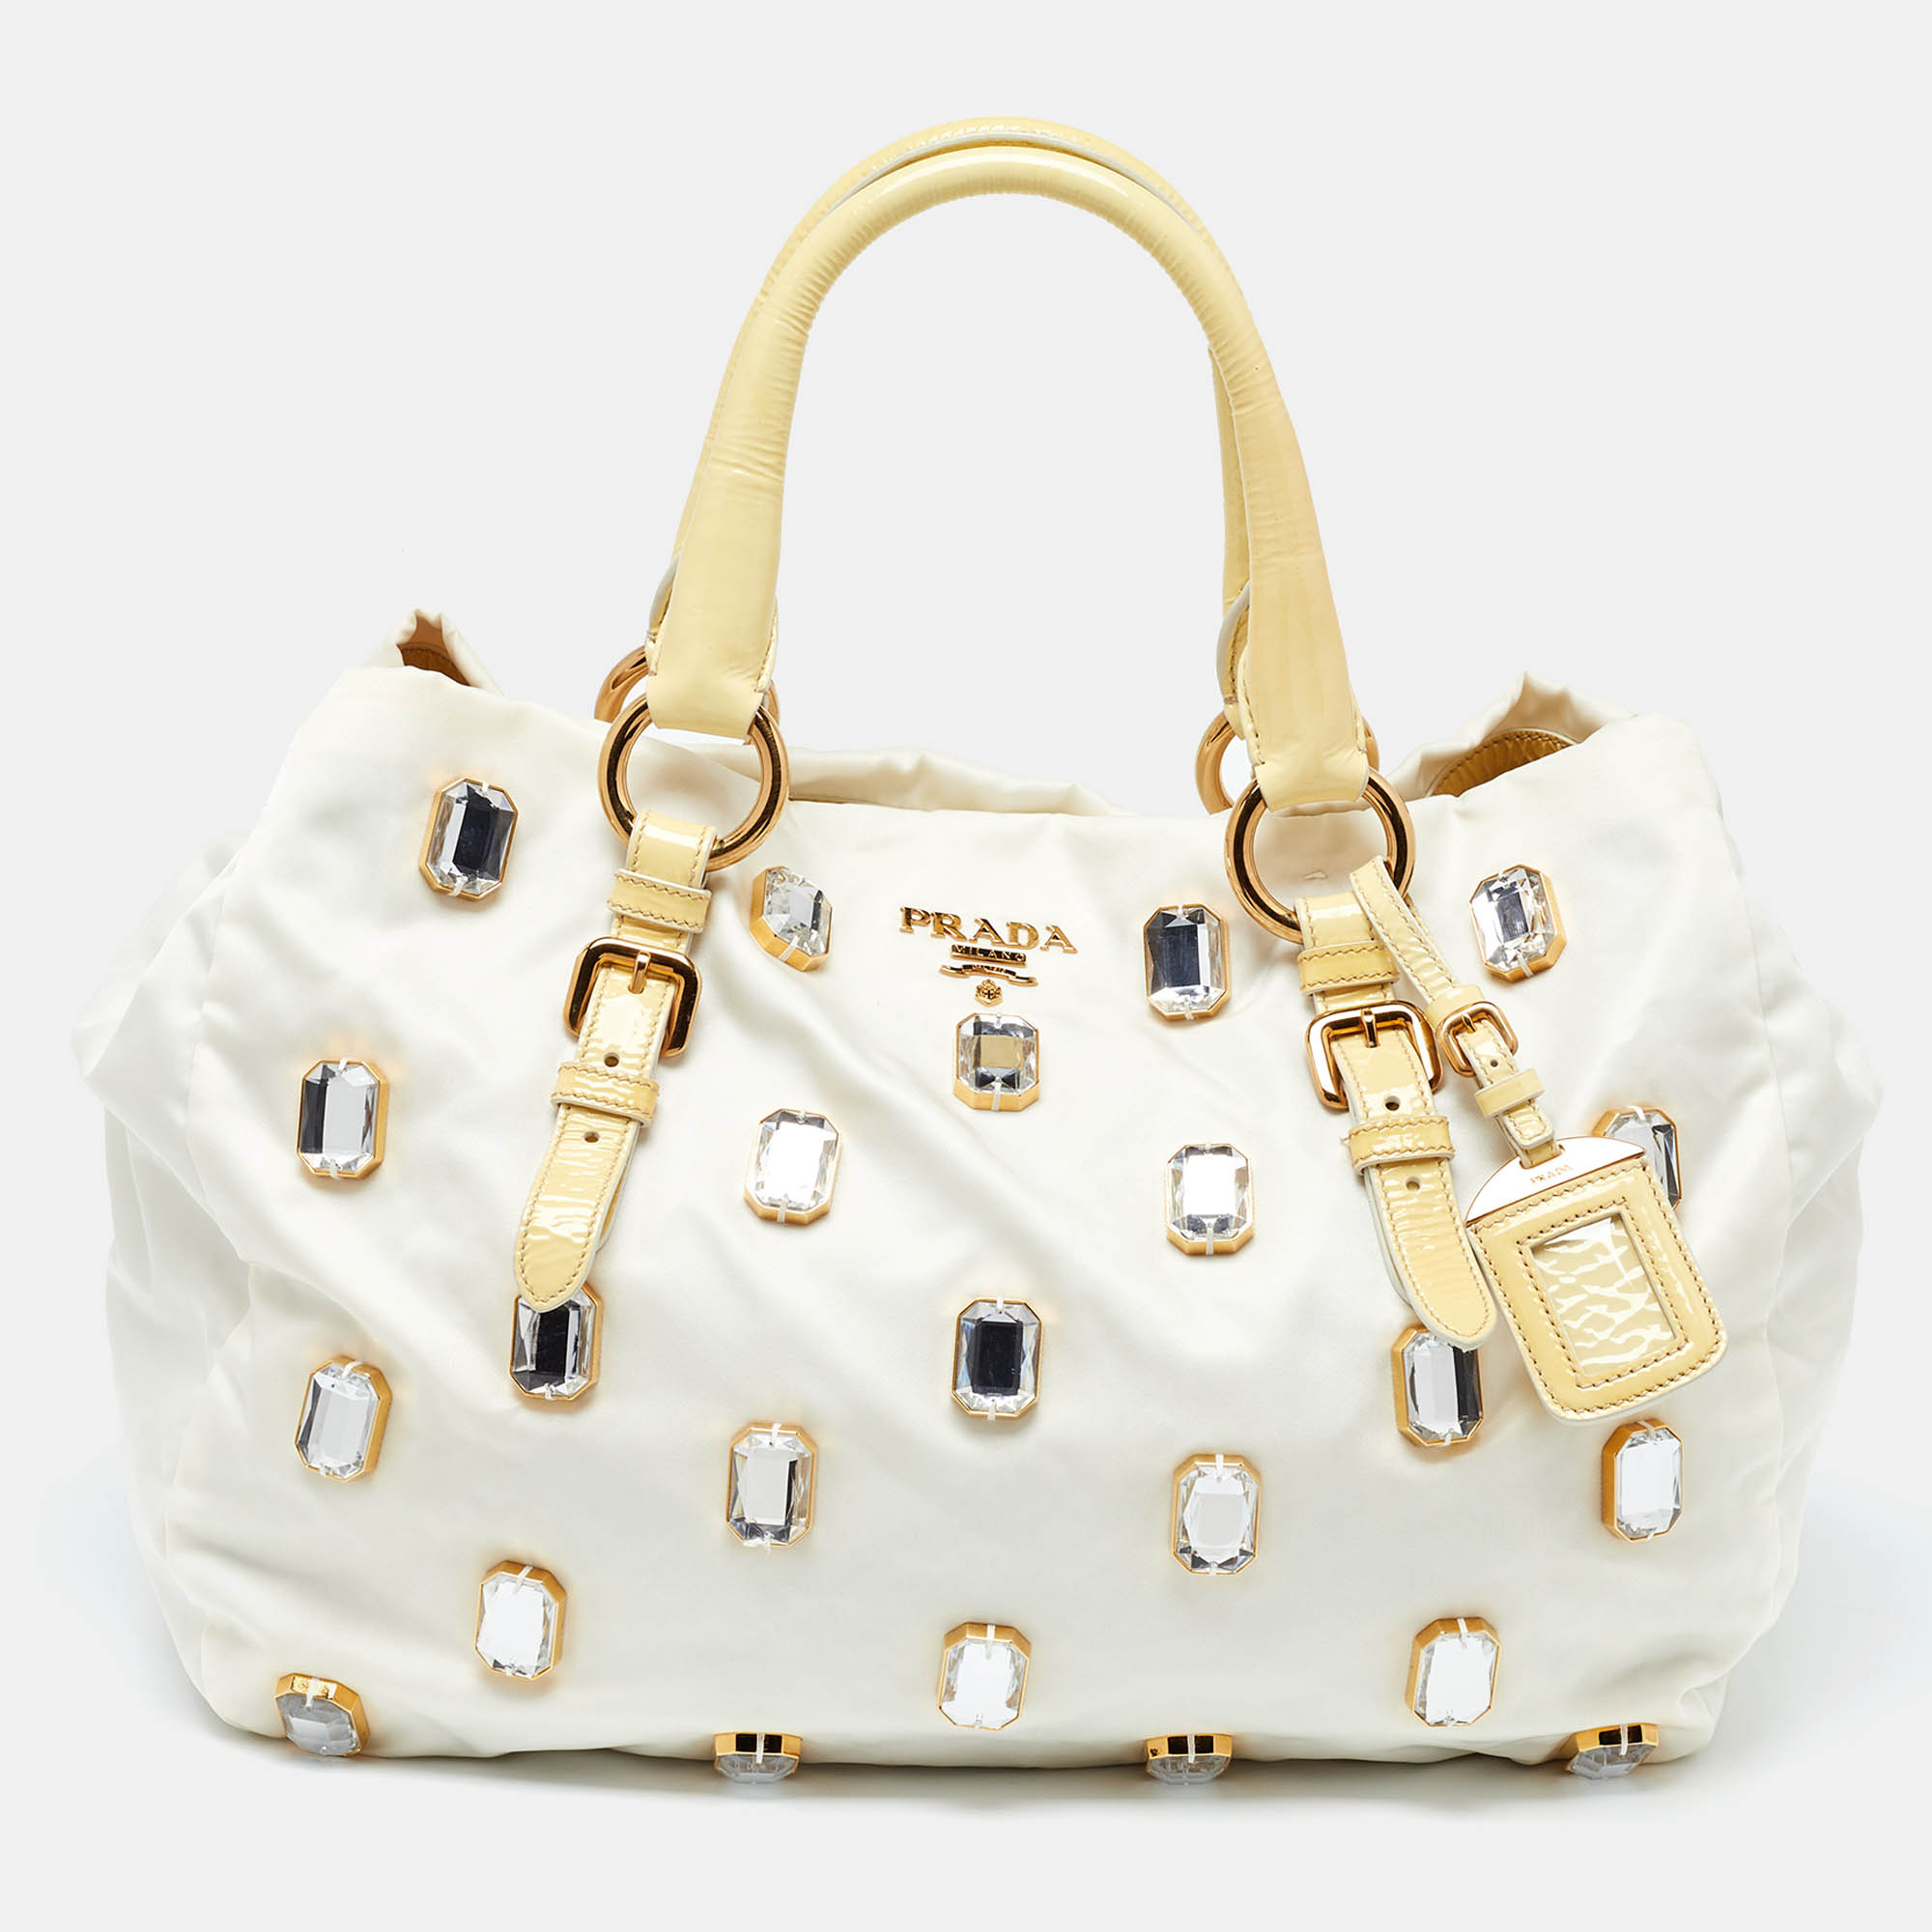 Prada light yellow/cream nylon and patent leather crystals embellished tote